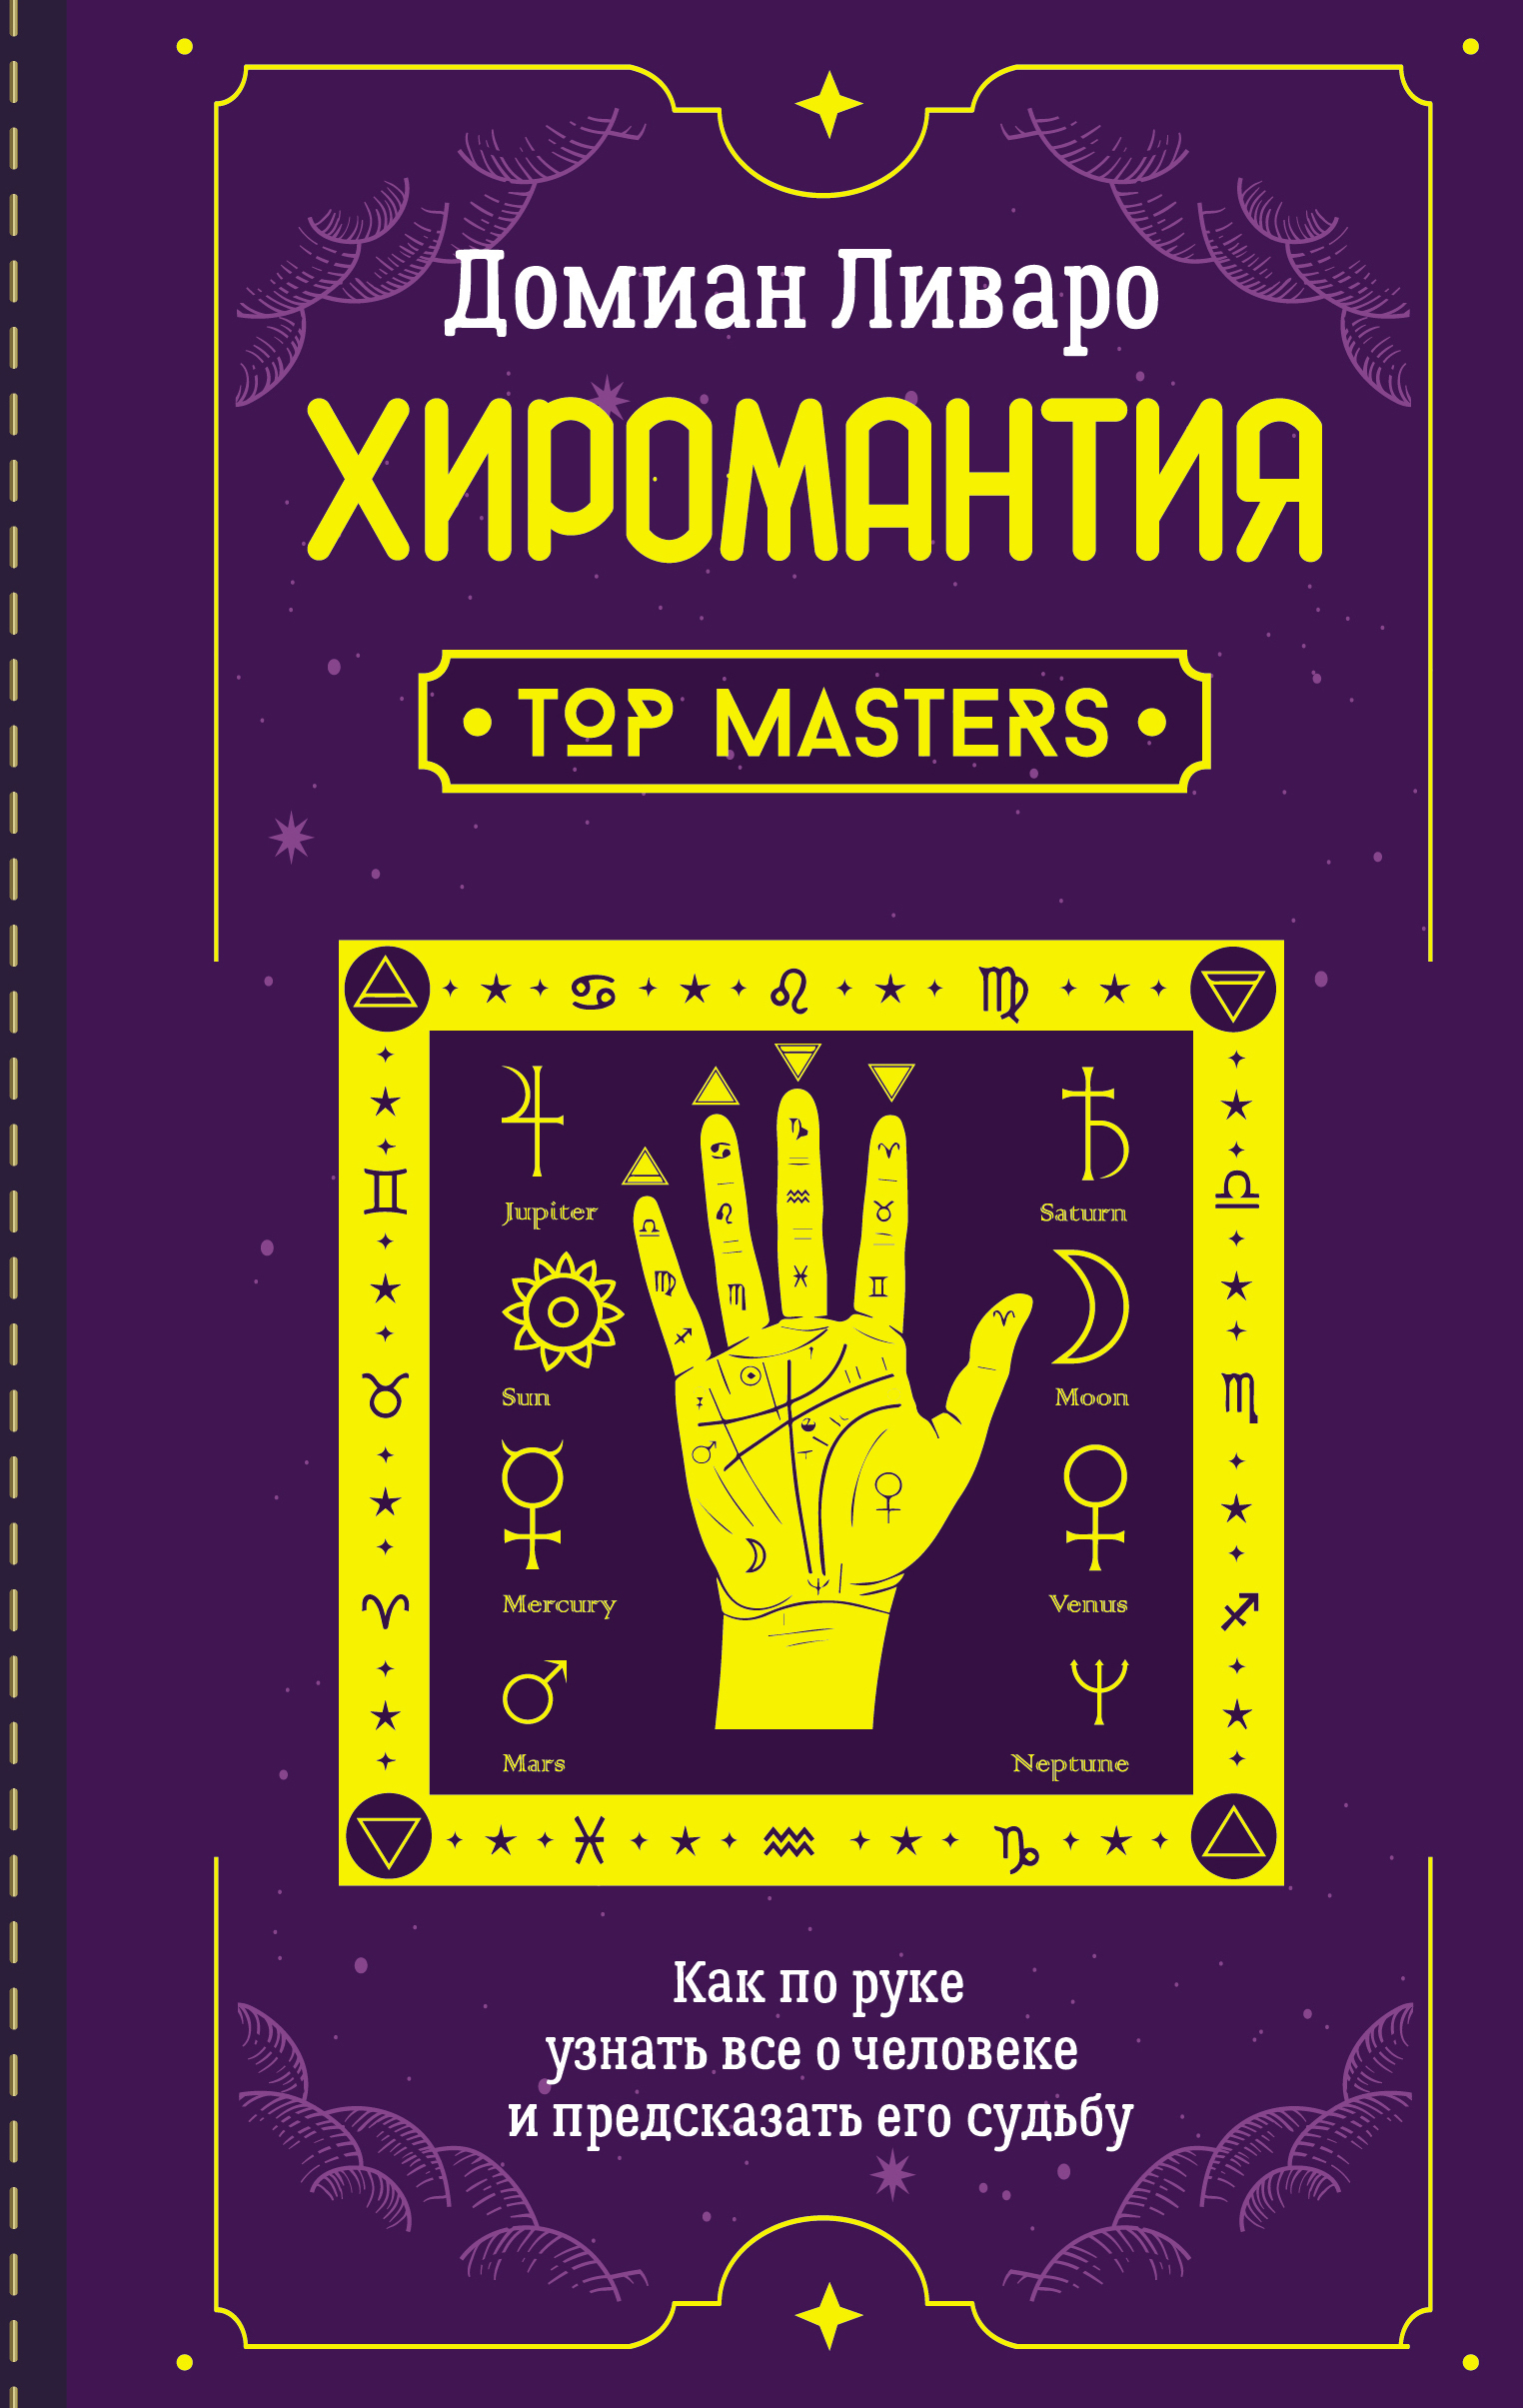  . . Top Masters 